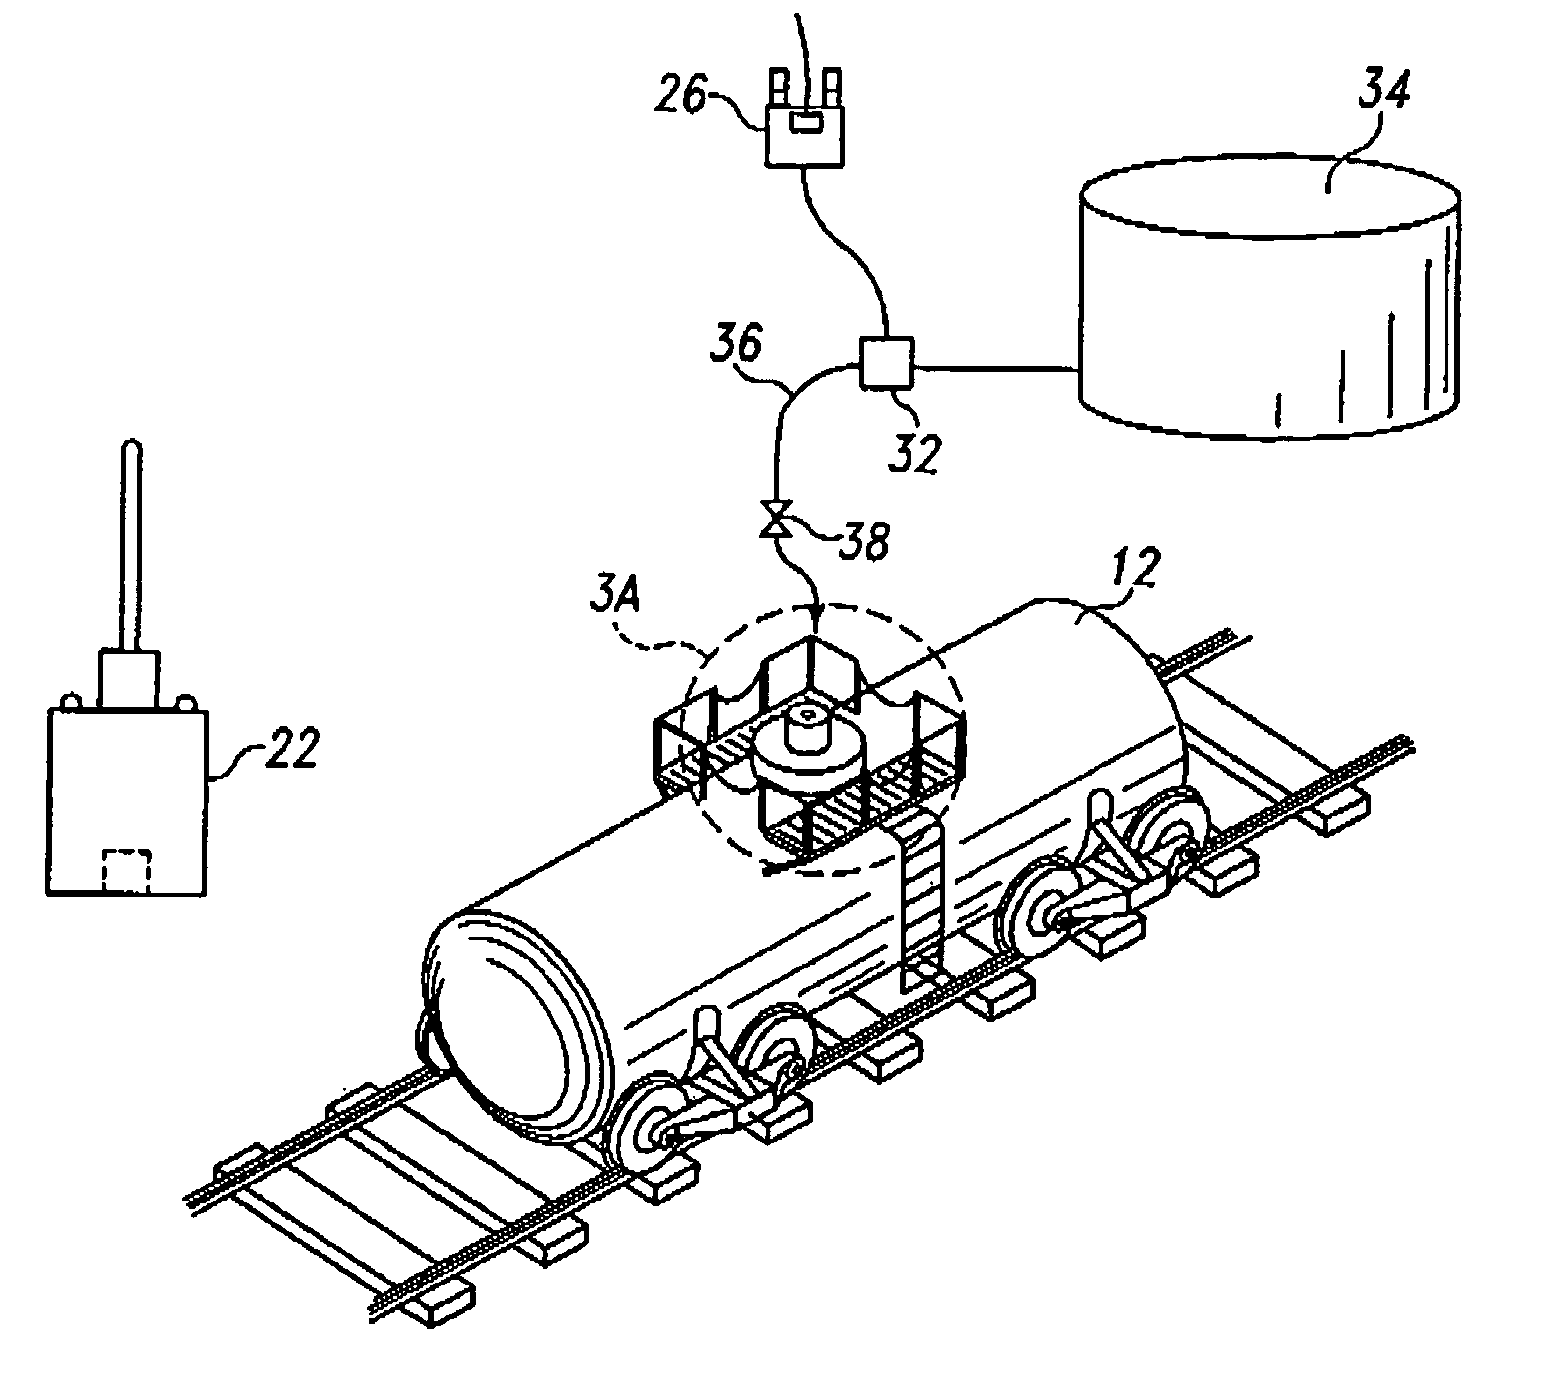 Tank car loading control and monitoring system and method